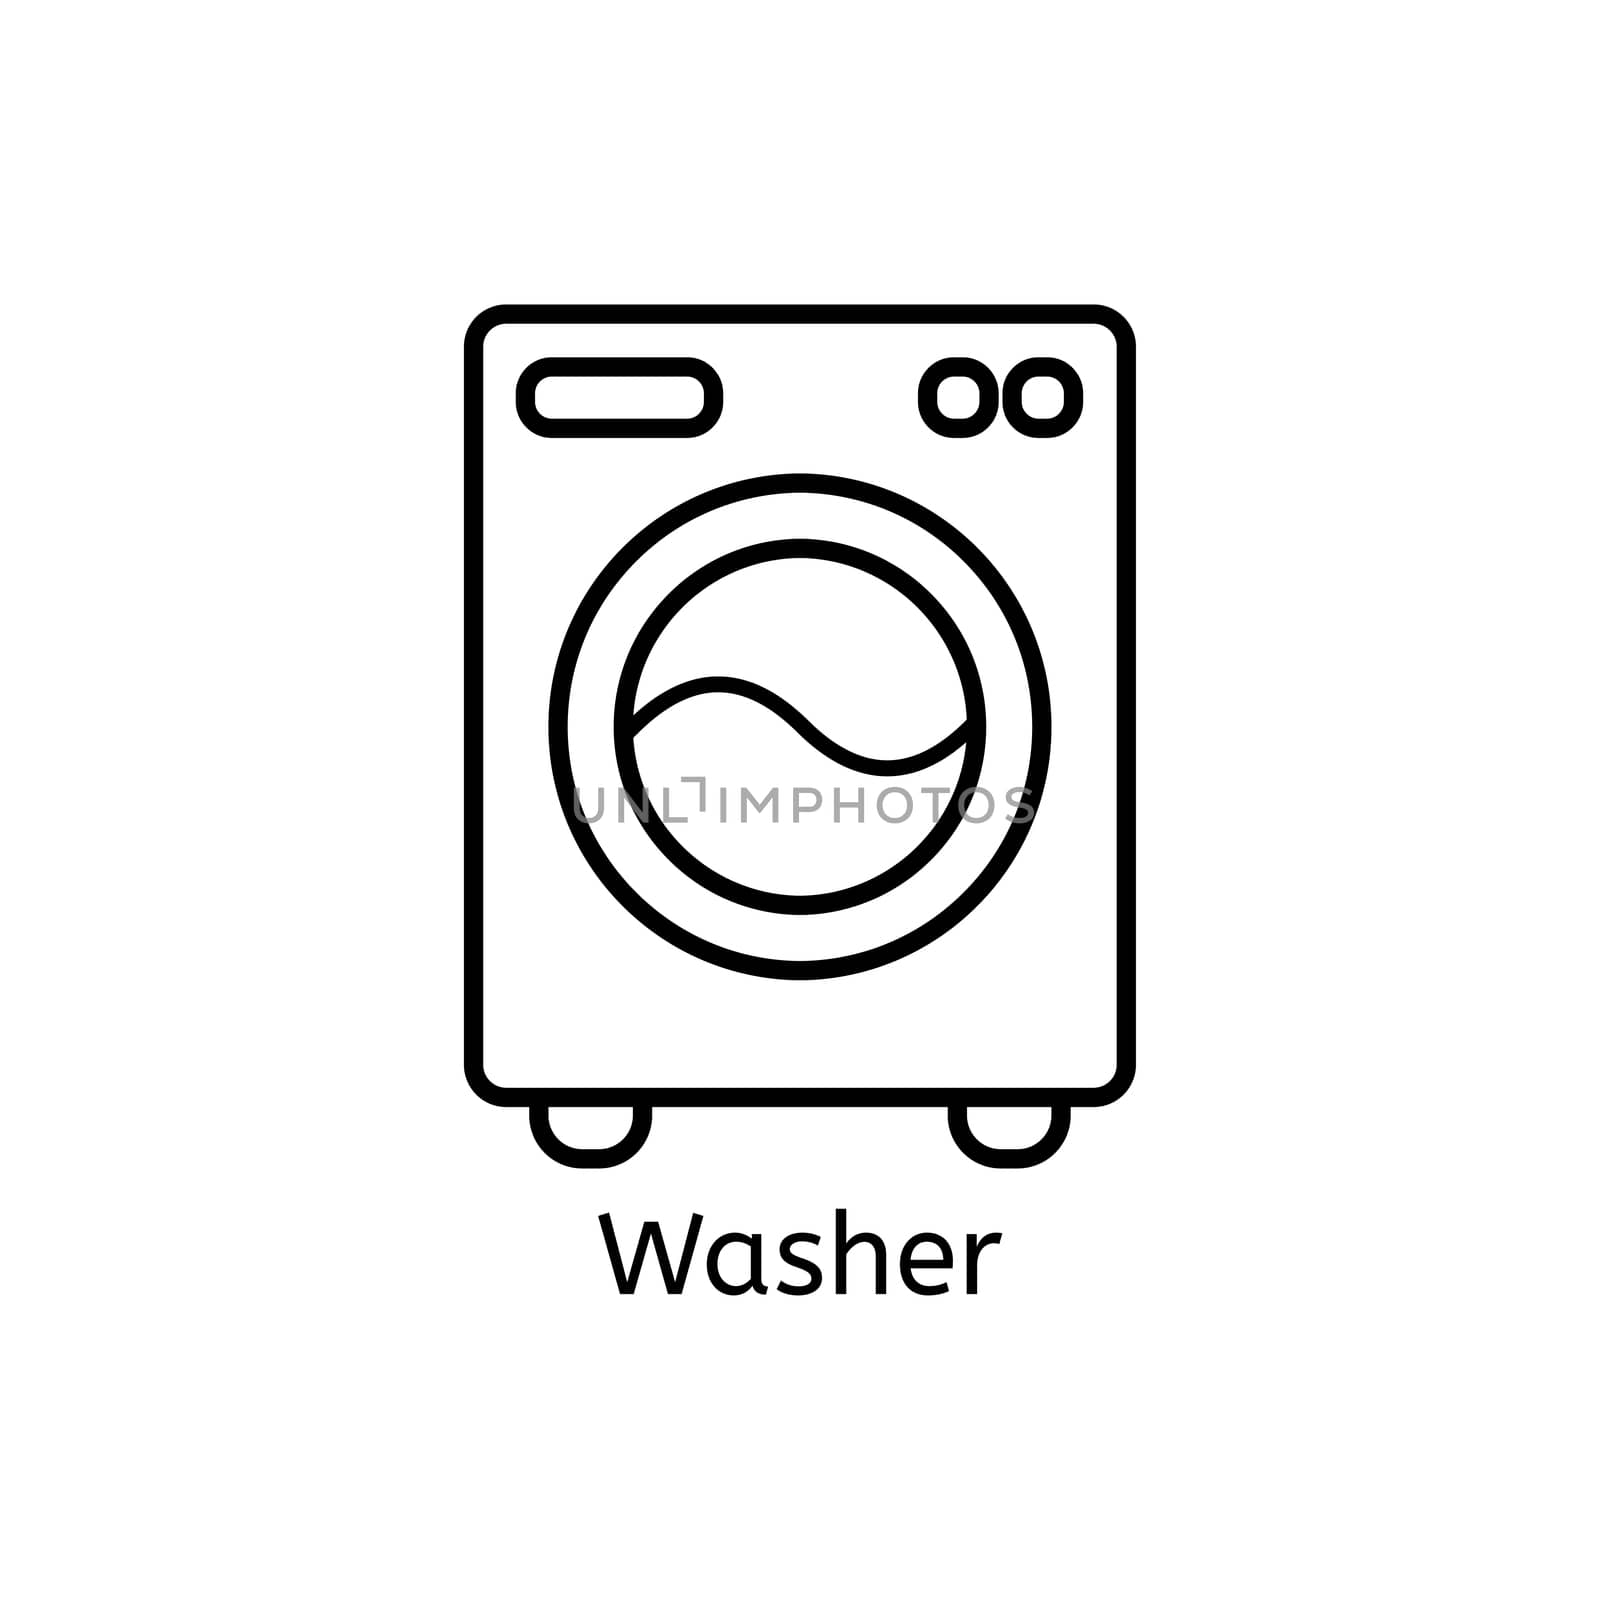 Washer simple line icon. Washing ma hine thin linear signs. Washing clothes simple concept for websites, infographic, mobile applications. by Elena_Garder